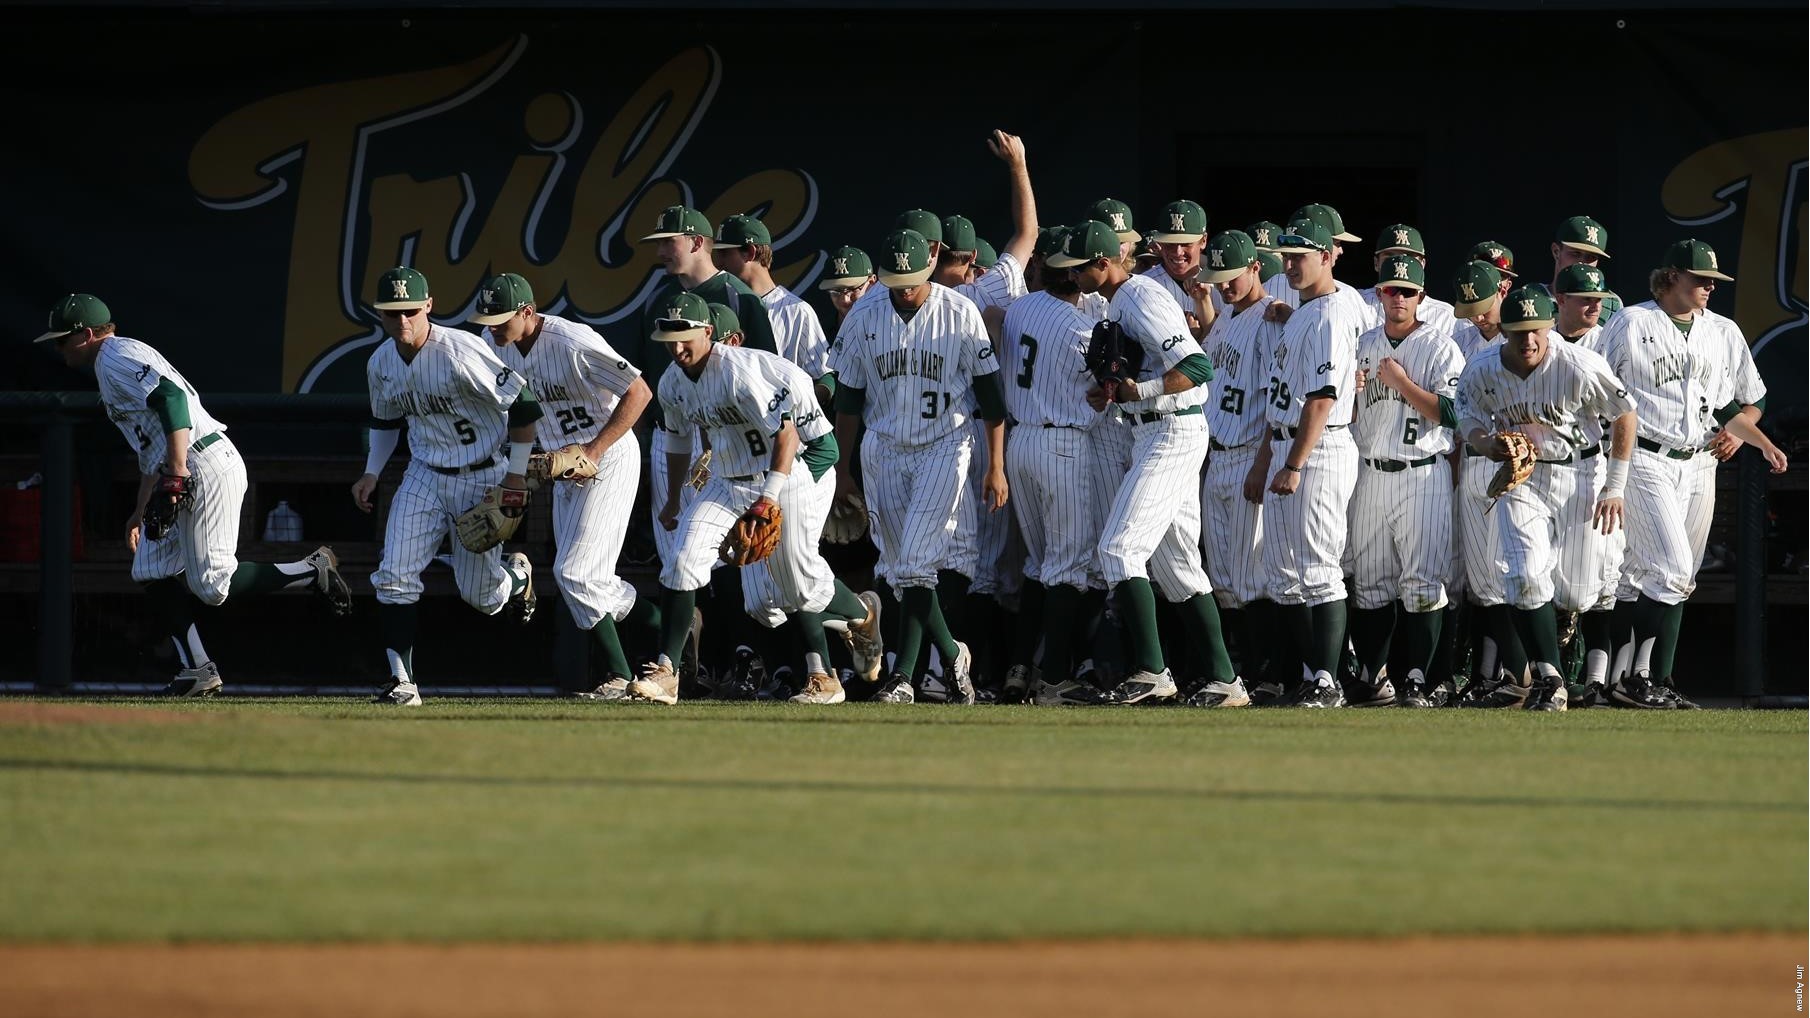 William and Mary releases 2018 Schedule - College Baseball Daily